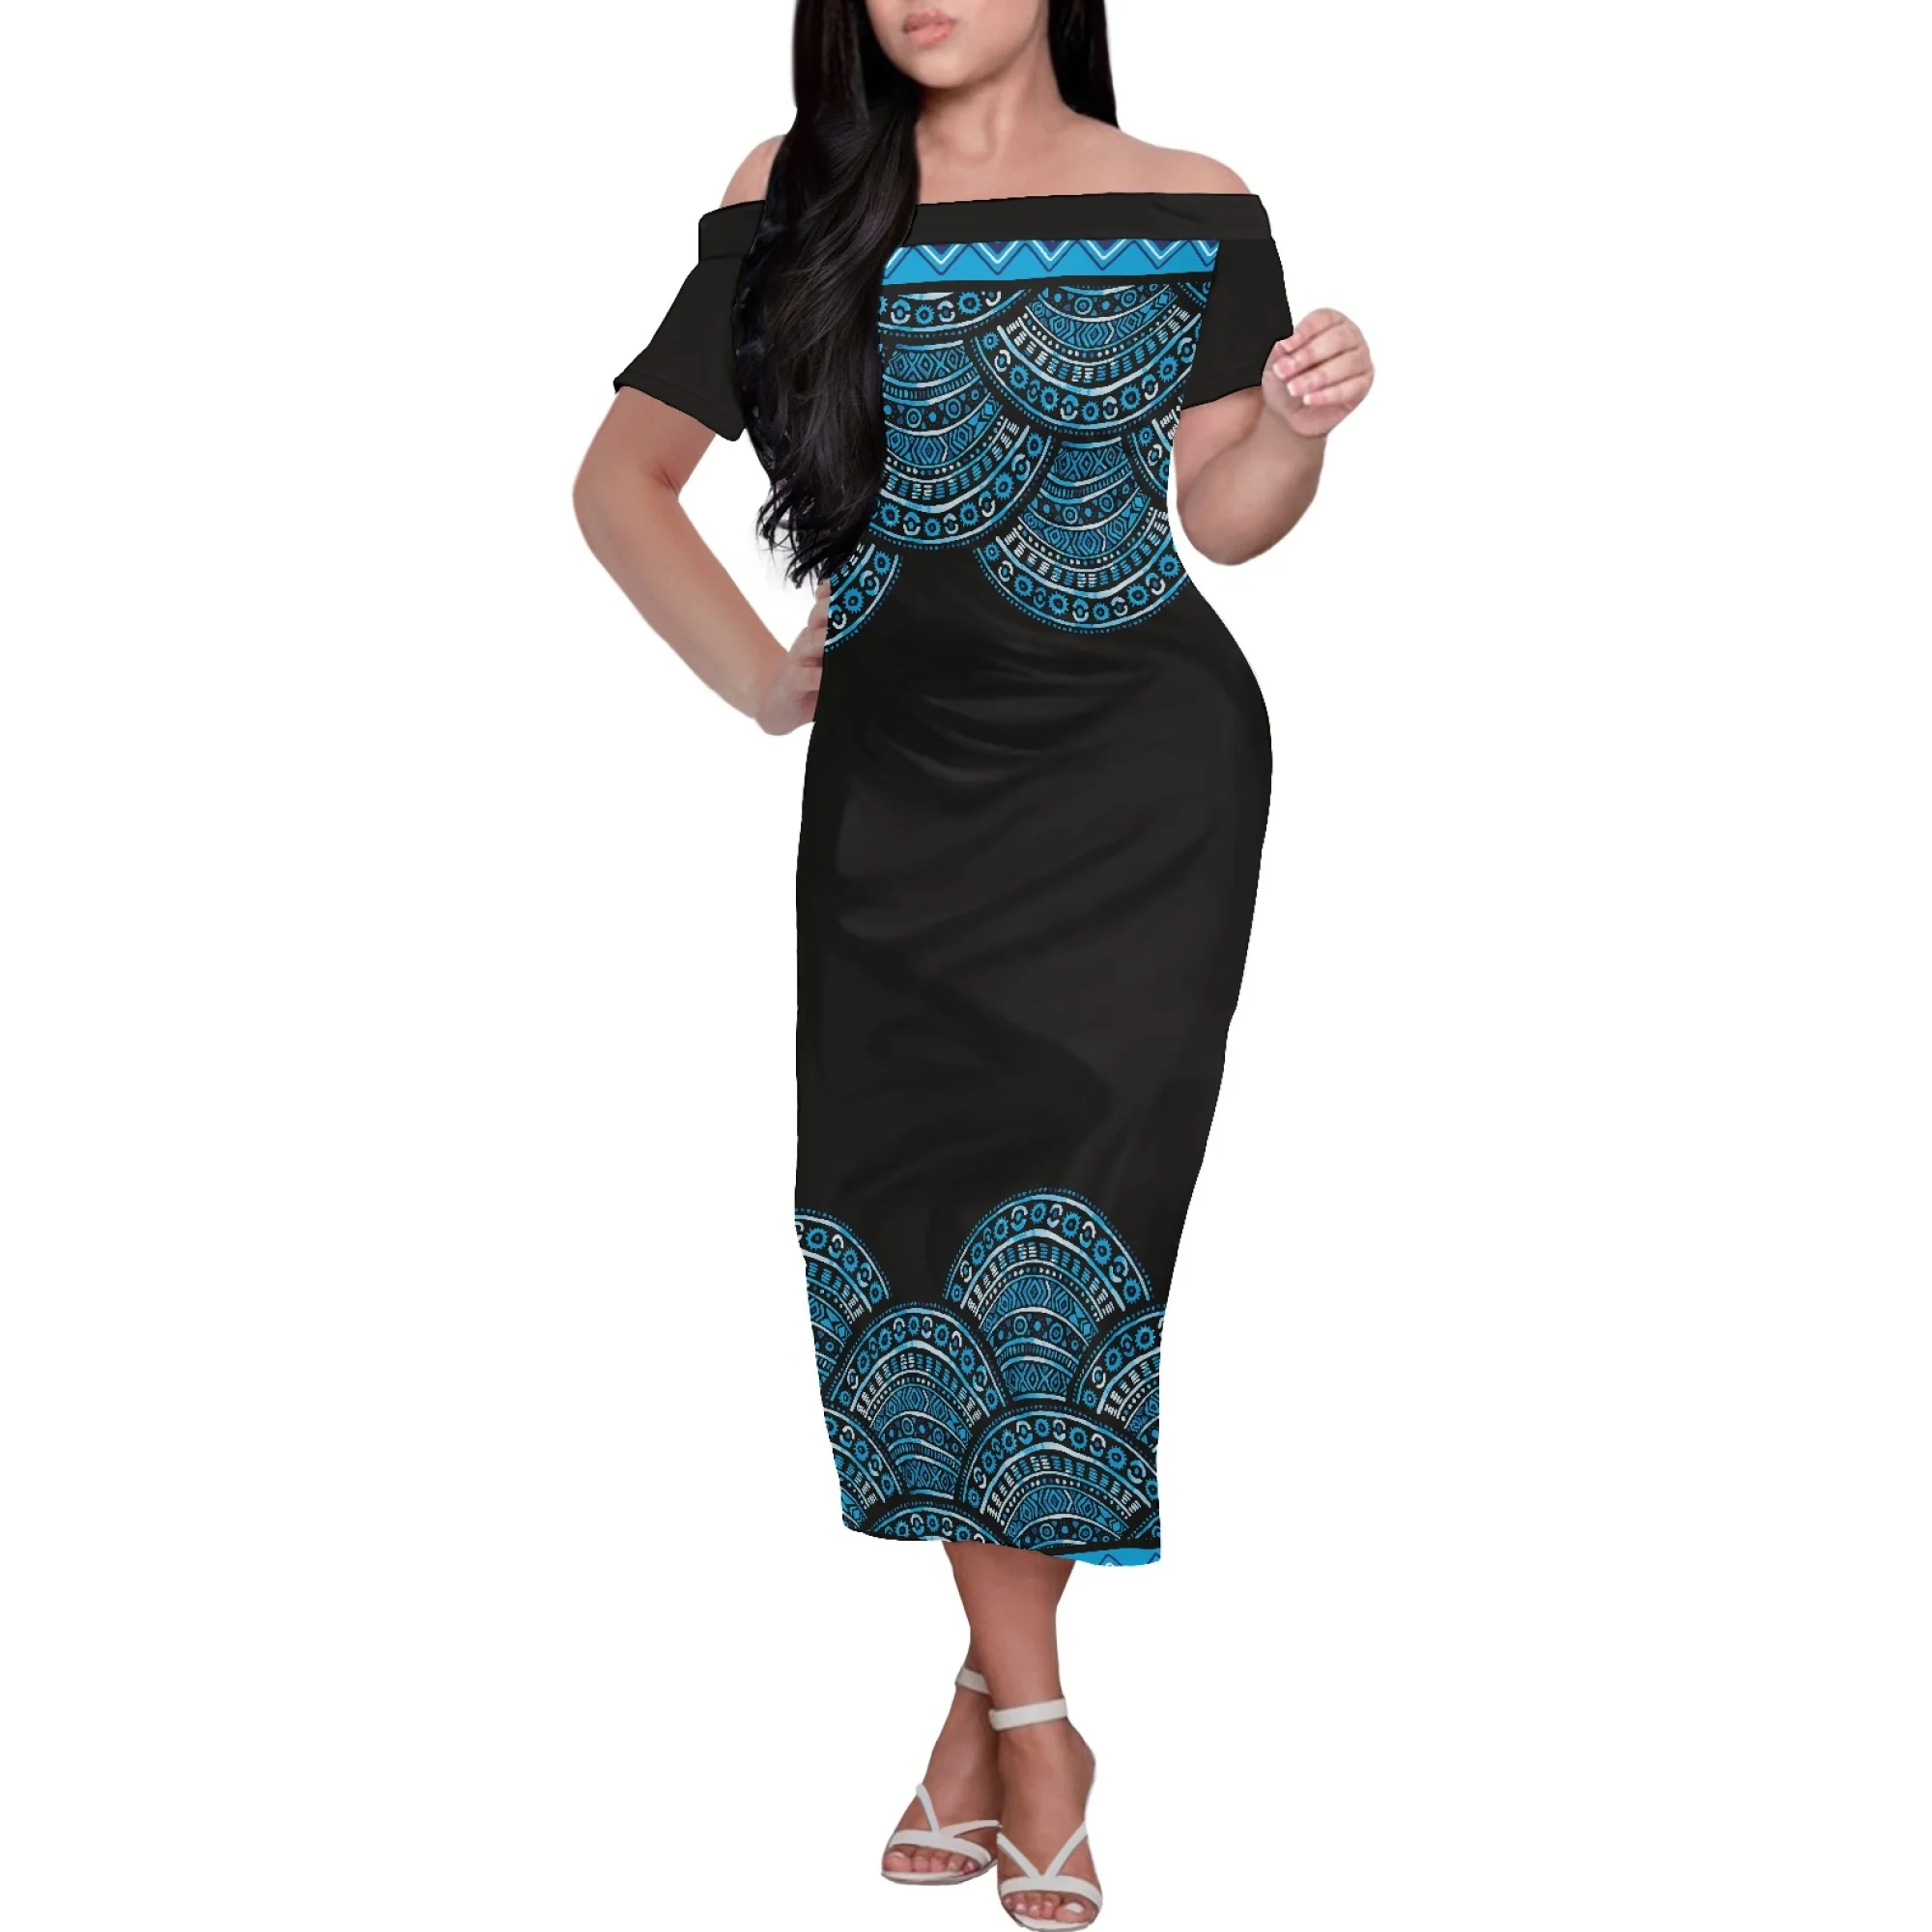 

Summer Polynesian Traditional Tribal Print Haute Couture One-Shoulder Dress Short Sleeve Formal Occasion Fashion Dress Banquet